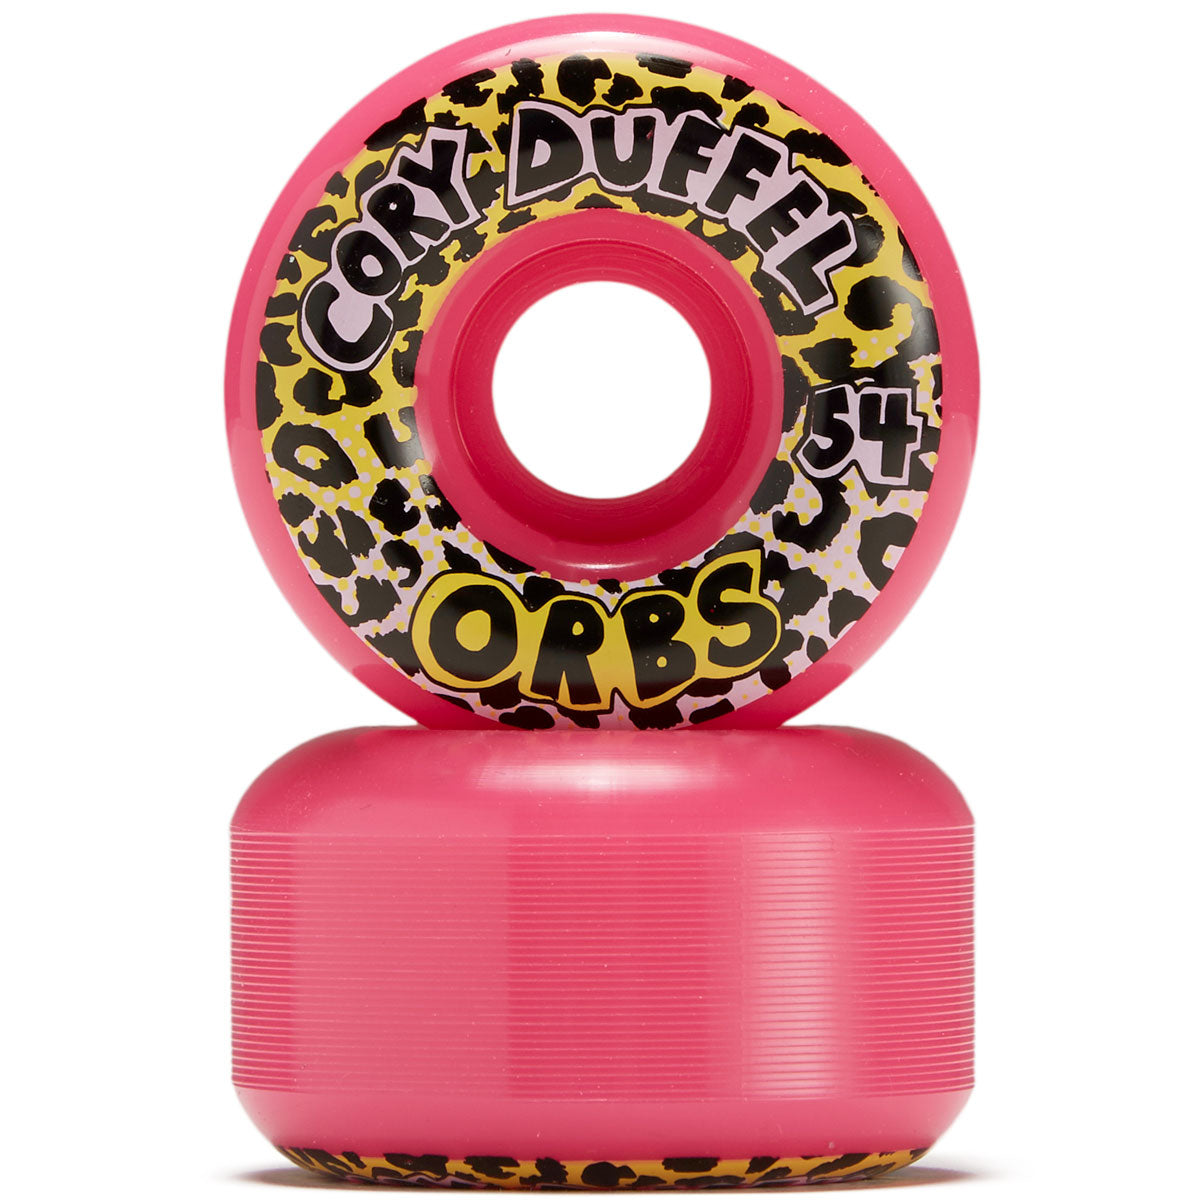 Welcome Orbs Apparitions Round 99A Duffel Skateboard Wheels - Pink - 54mm image 2